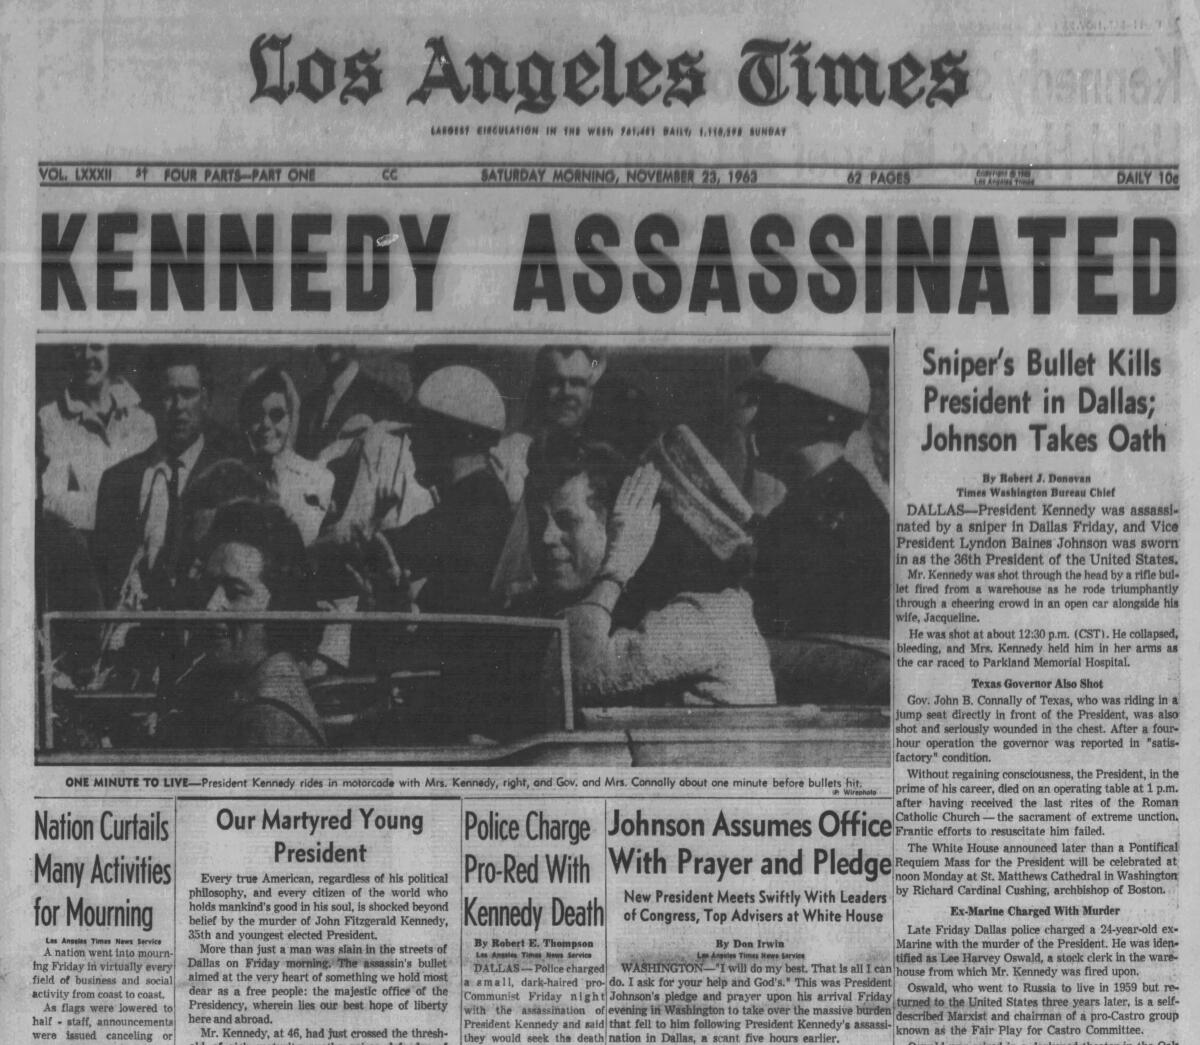 The Los Angeles Times on Nov. 23, 1963.